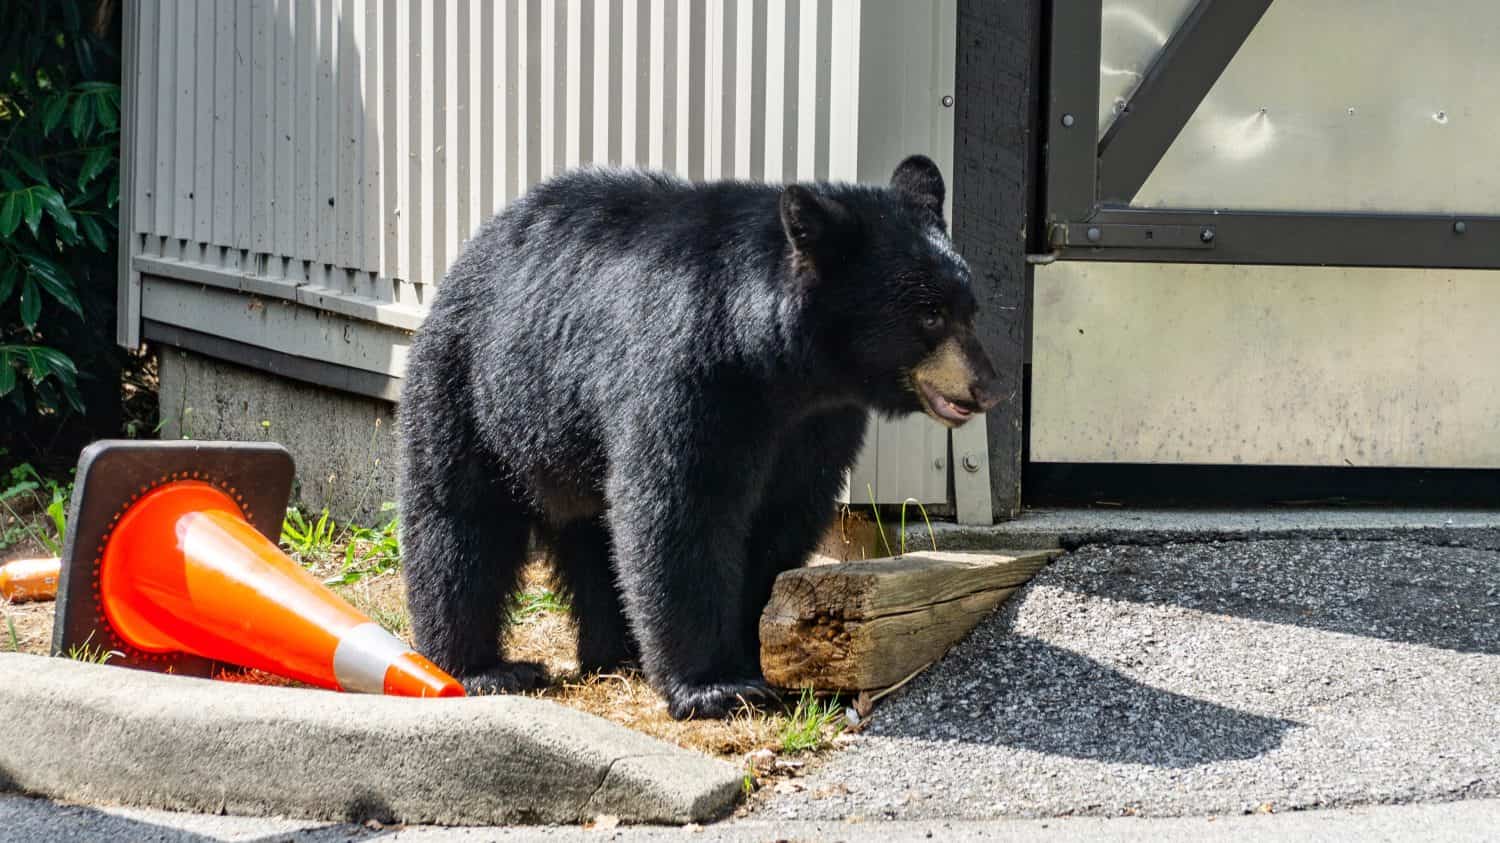 Young black bear is looking for food next to garbage enclosure